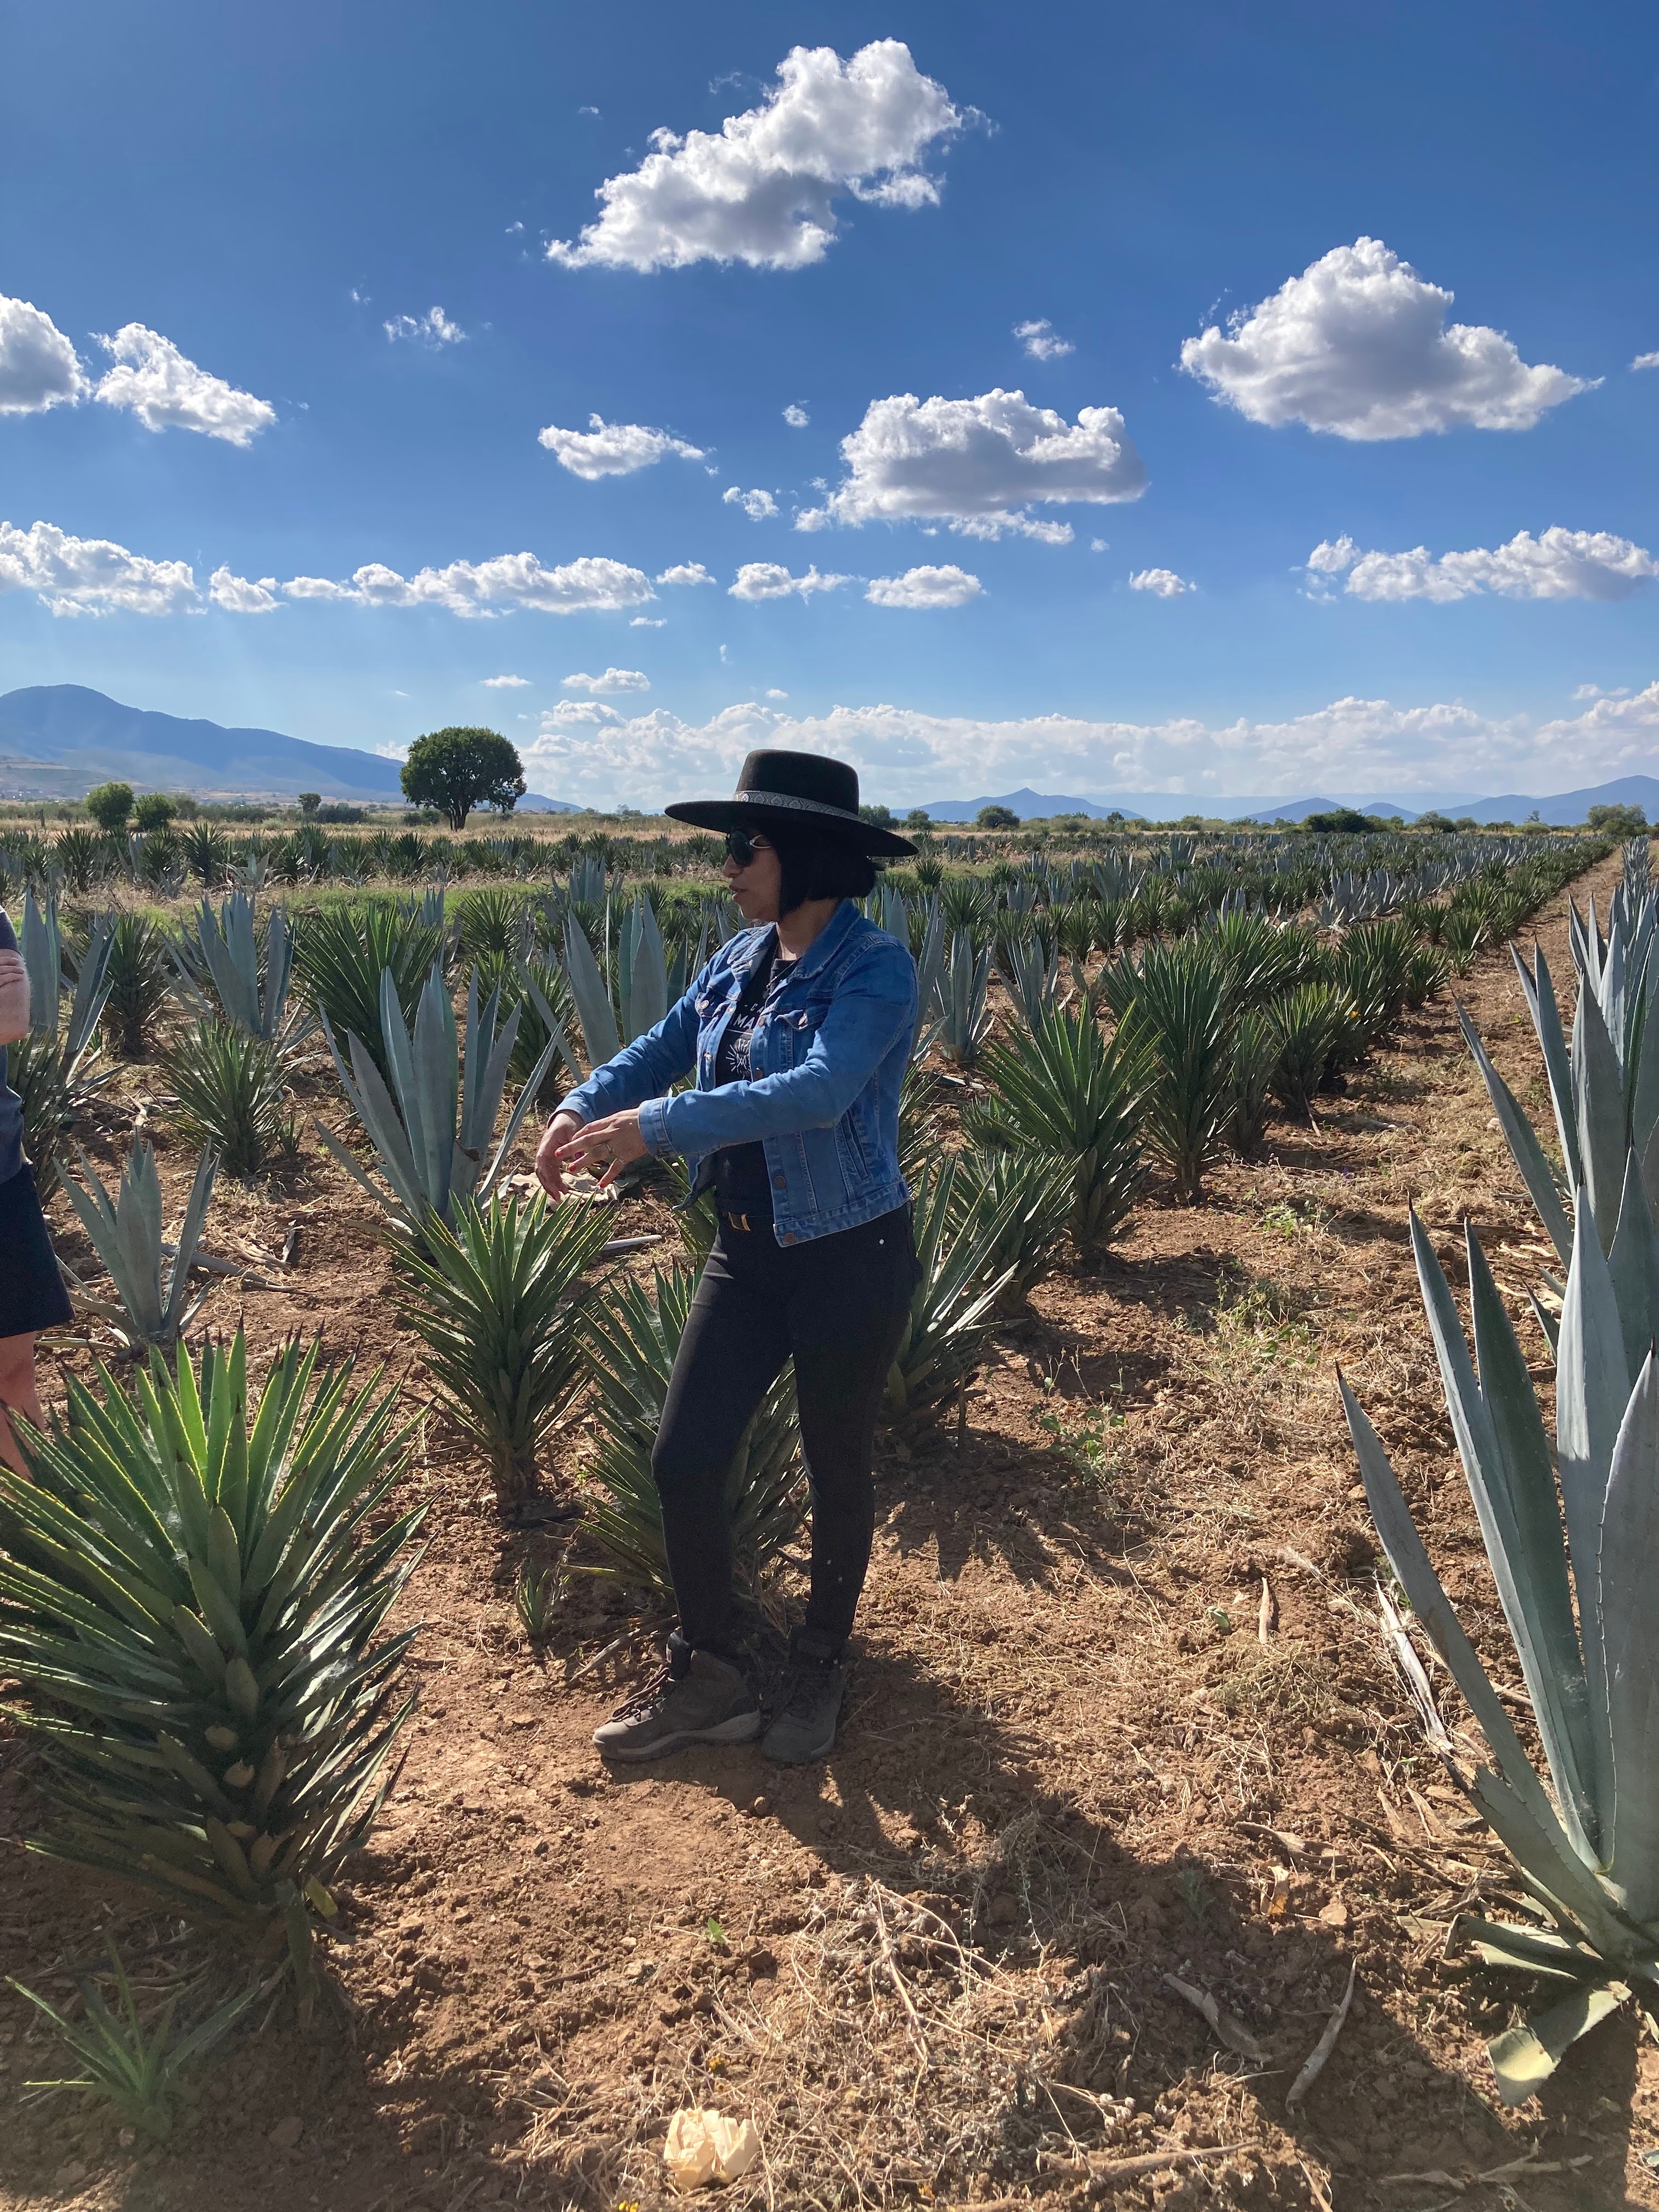 Rosario Gabriel from Mezcal Amaras discussing agave production with XMNR students and faculty in Oaxaca, Mexico. Photo: Amy Hubbard